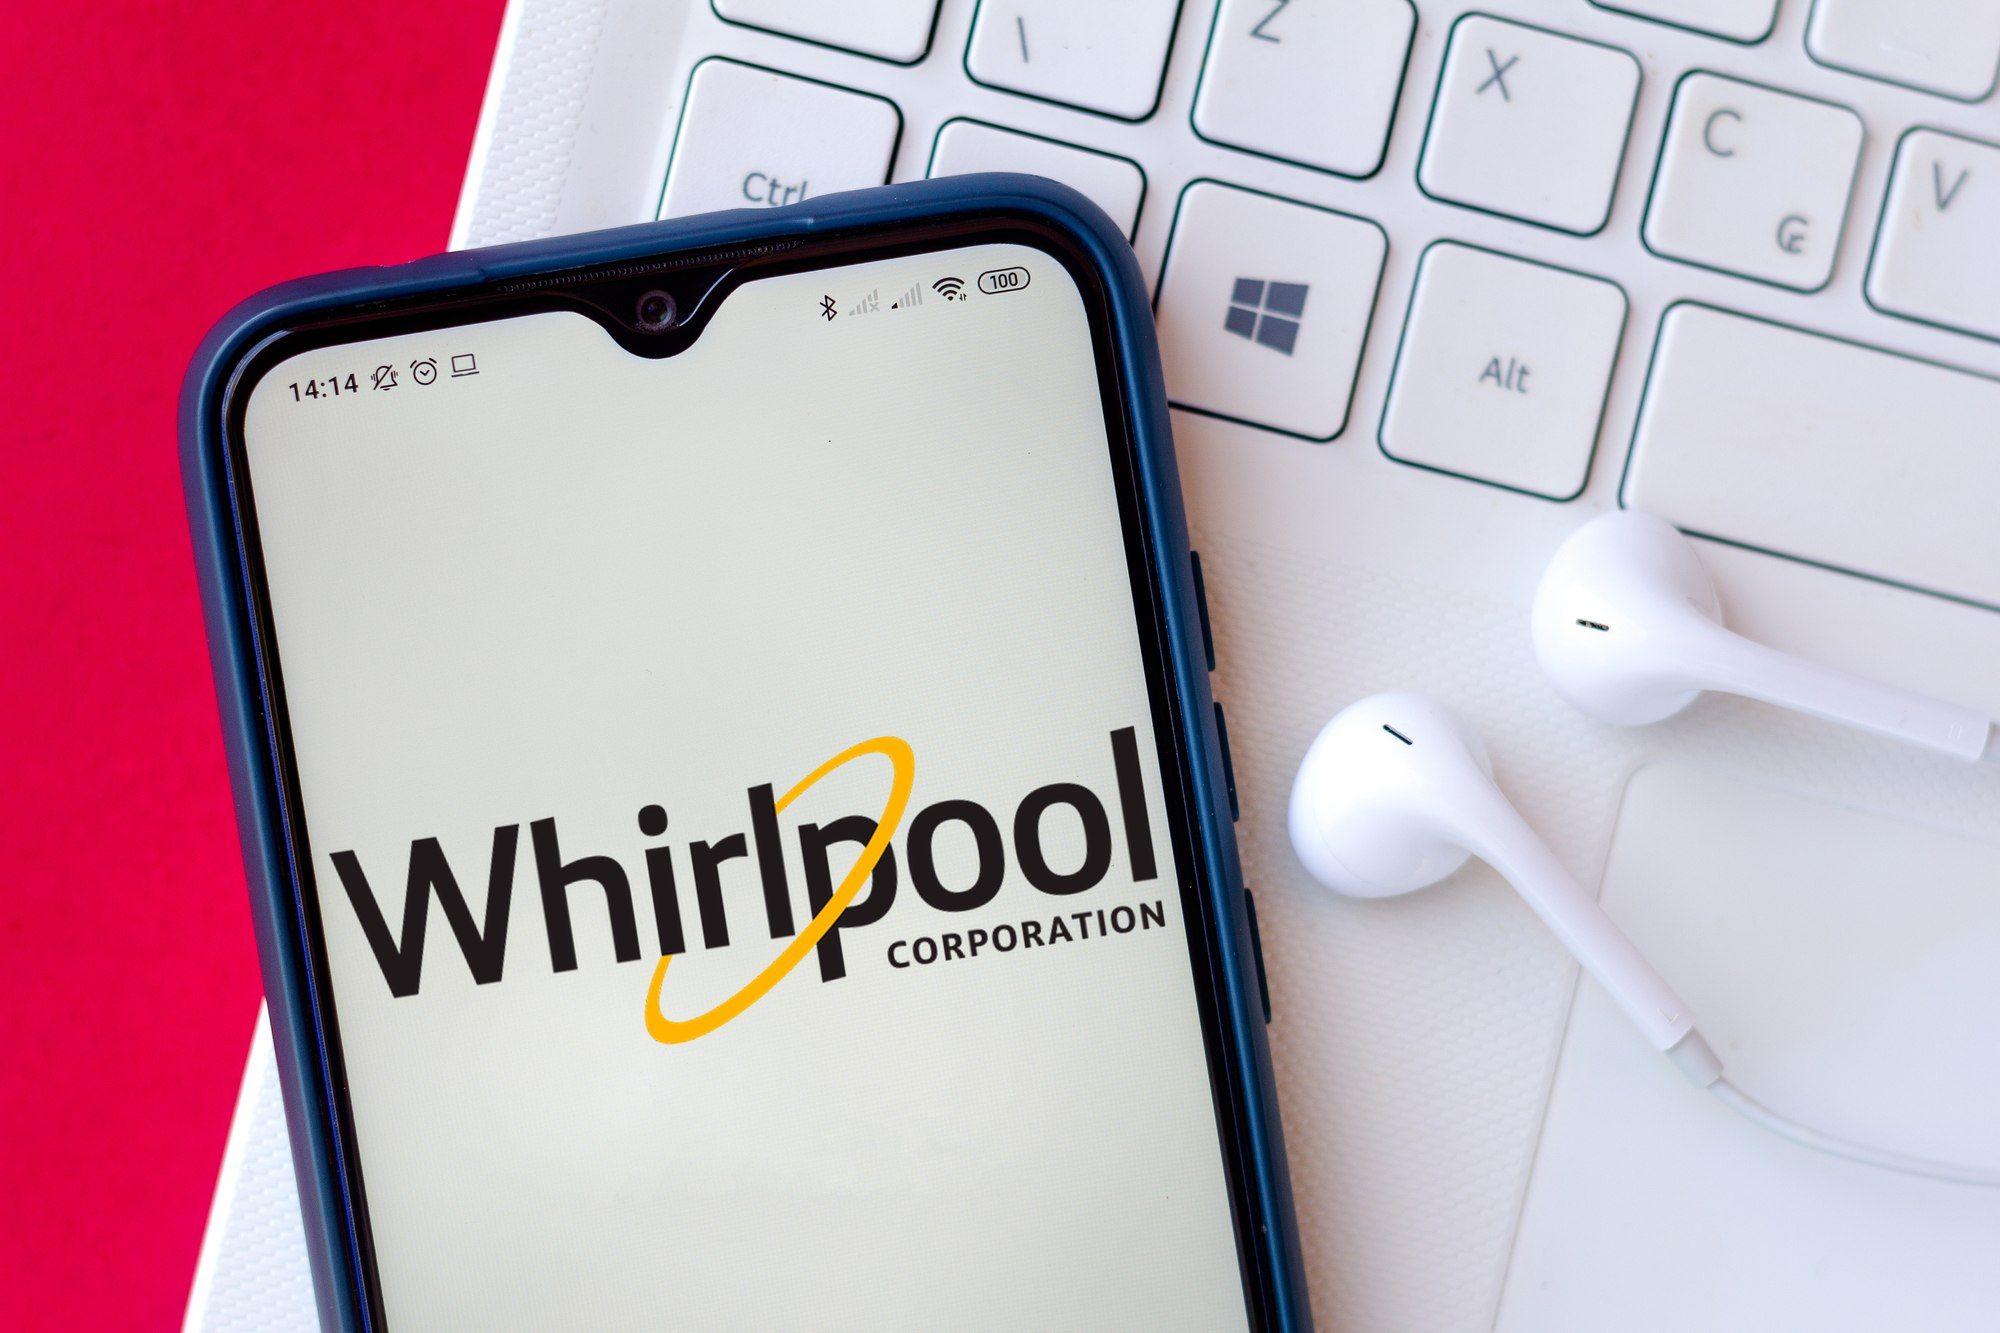 A Florida class action lawsuit accuses Whirlpool of violating the state's privacy laws.